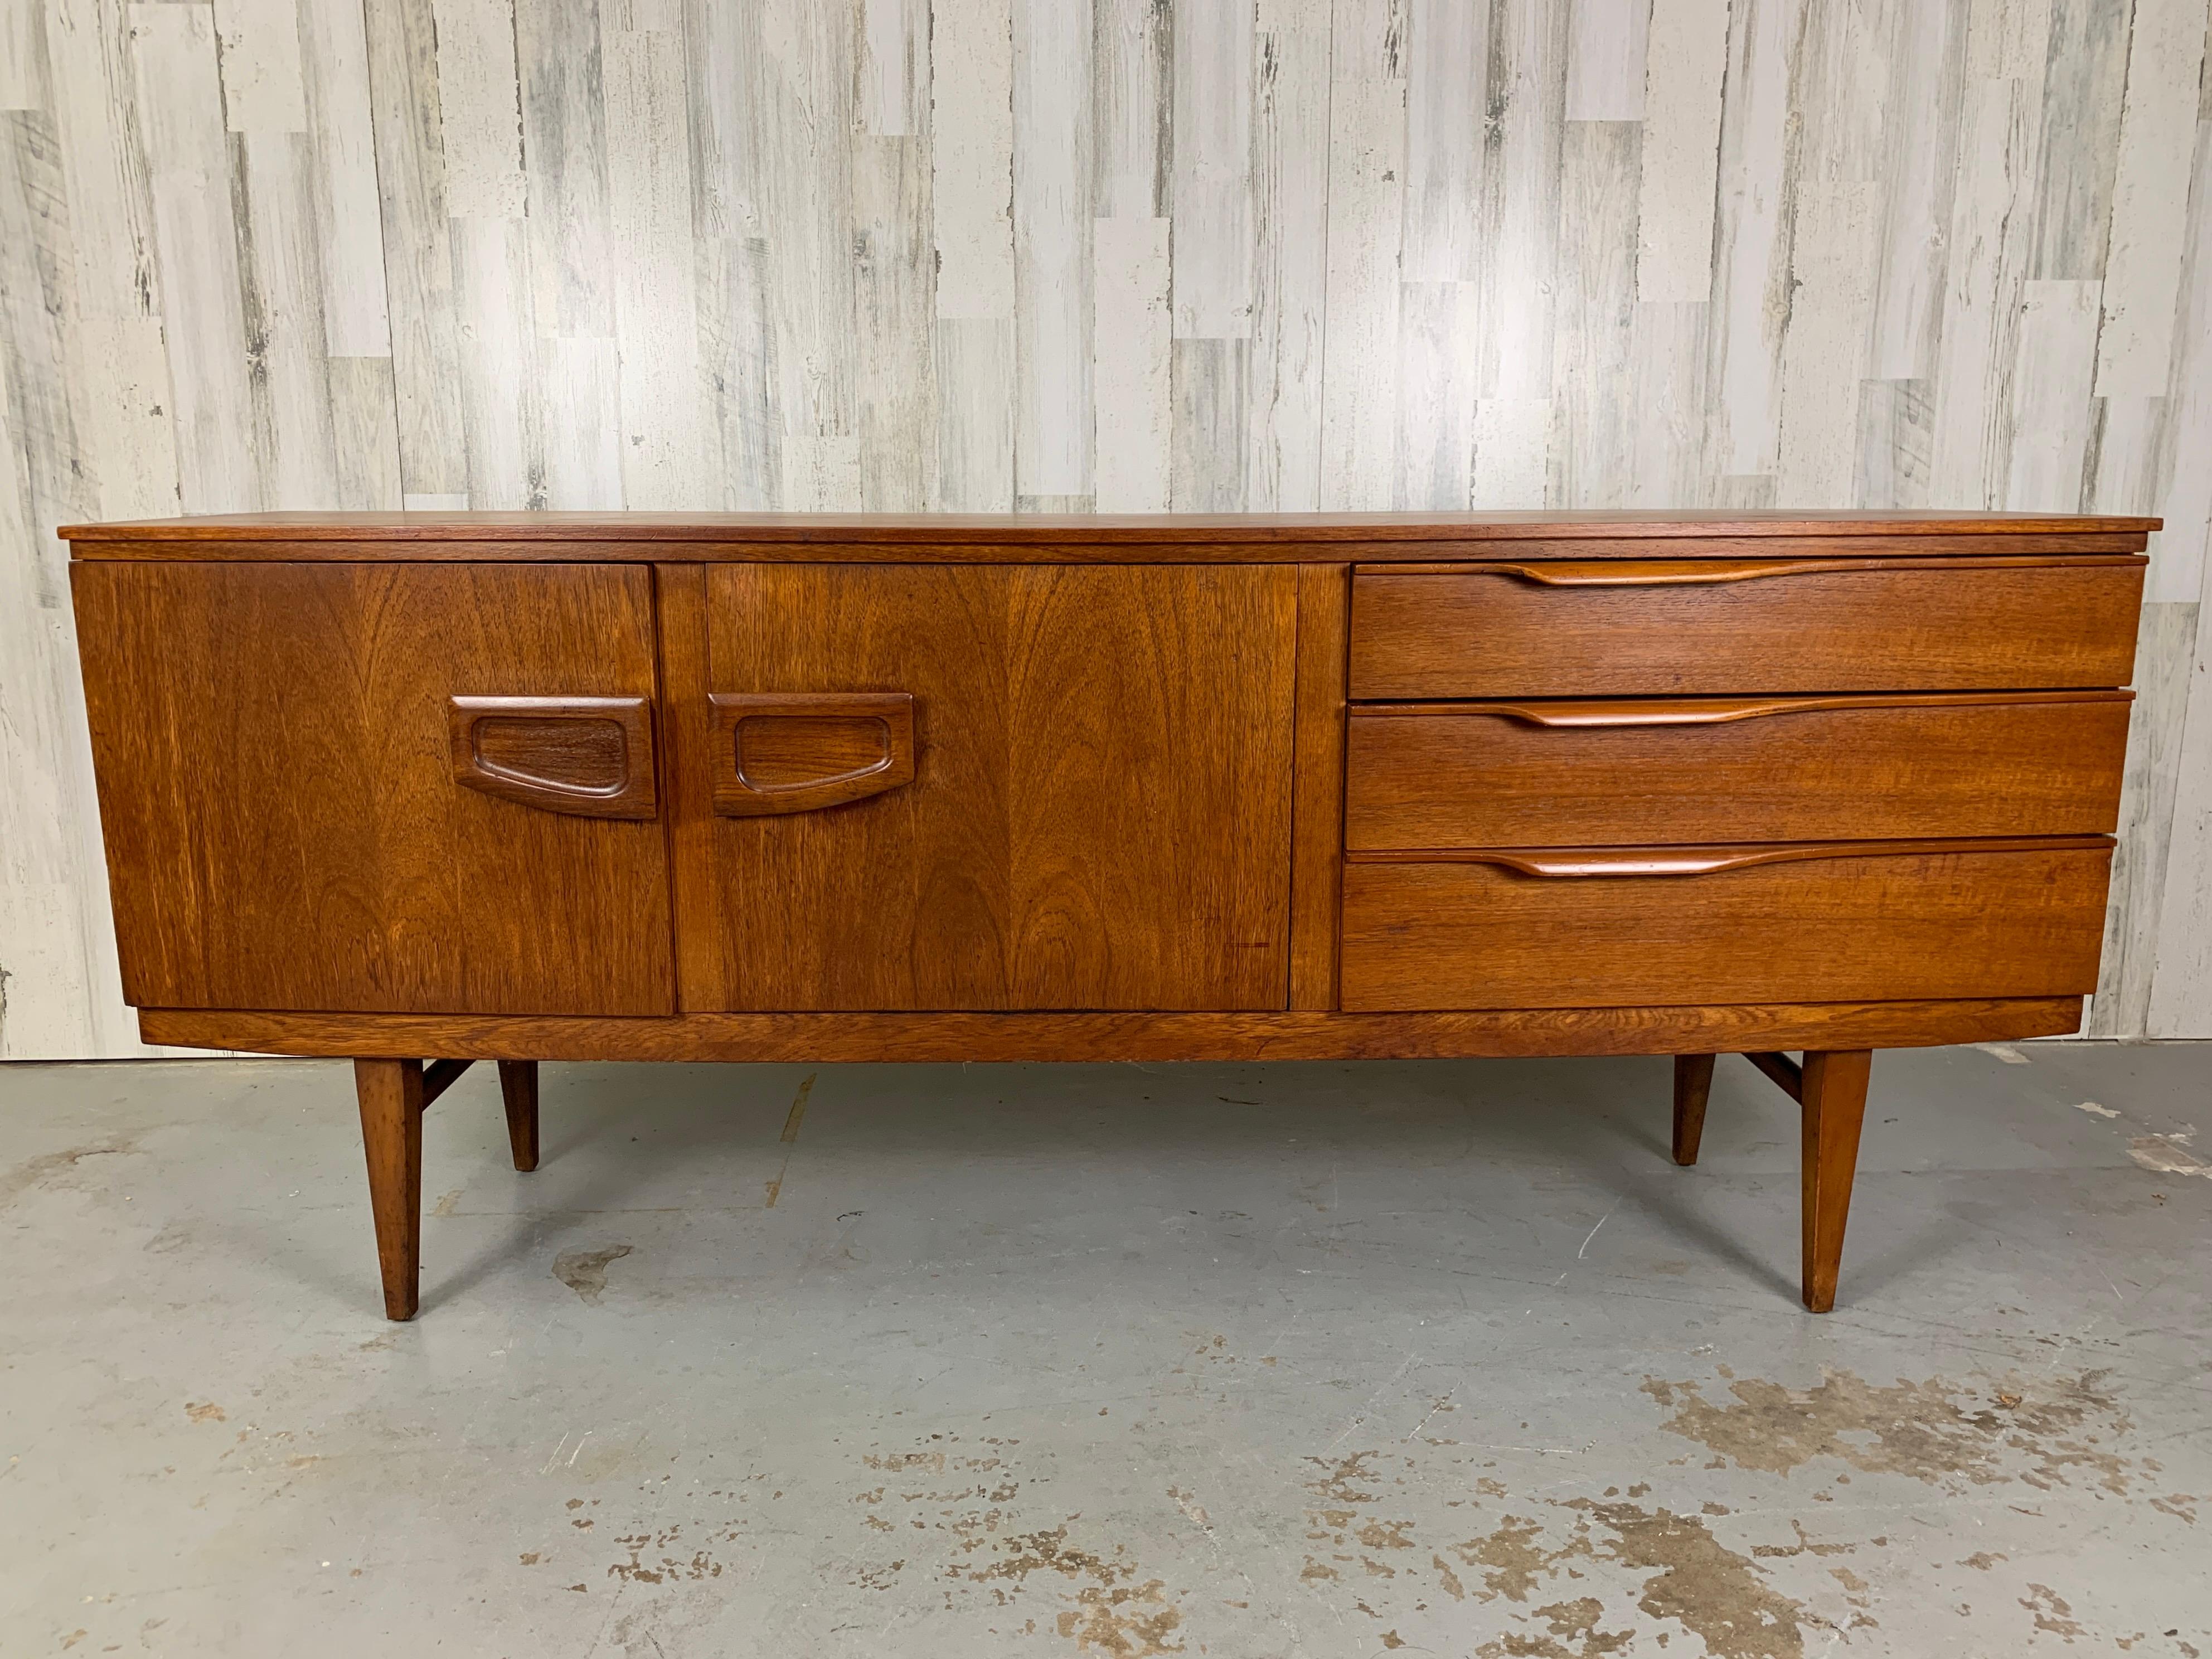 Danish modern style bow front teak credenza with center fold down laminate bar area.